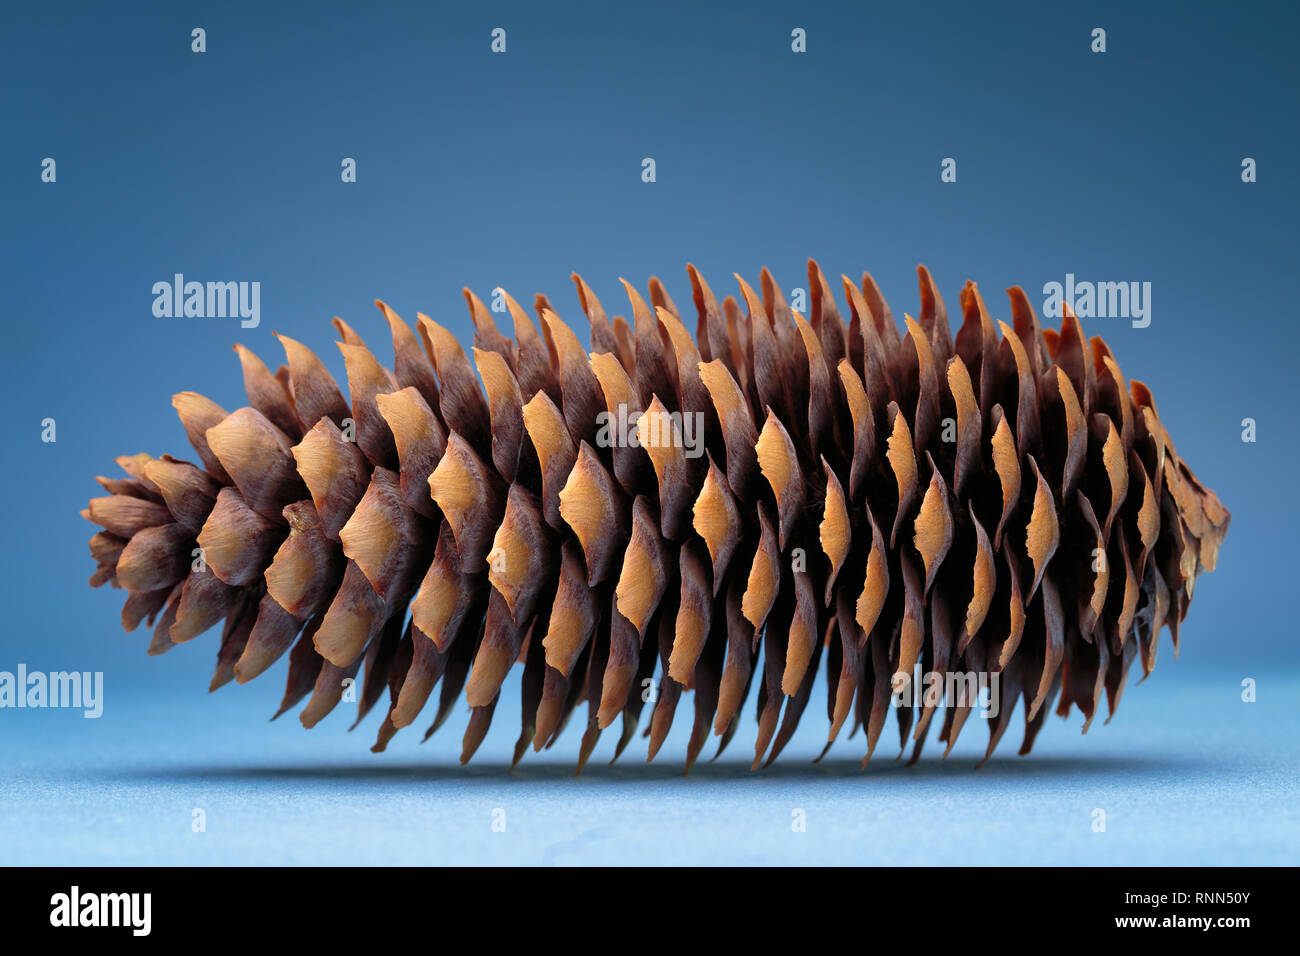 Dry spruce cone on the blue background. Studio photography. Stock Photo